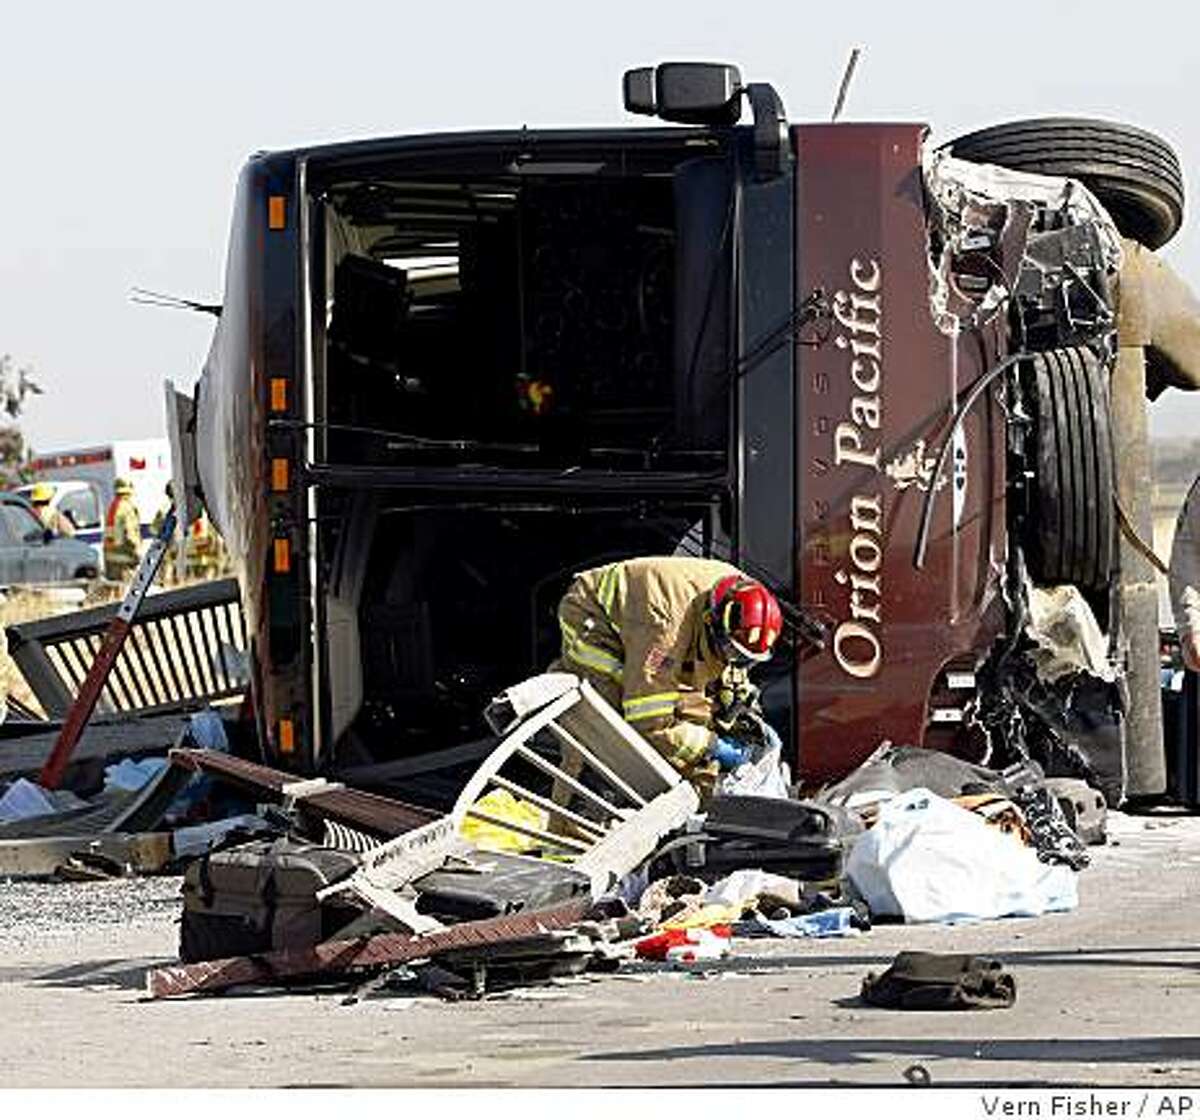 A firefighter investigates the tour bus that crashed Tuesday on U.S. 101 near Soledad.